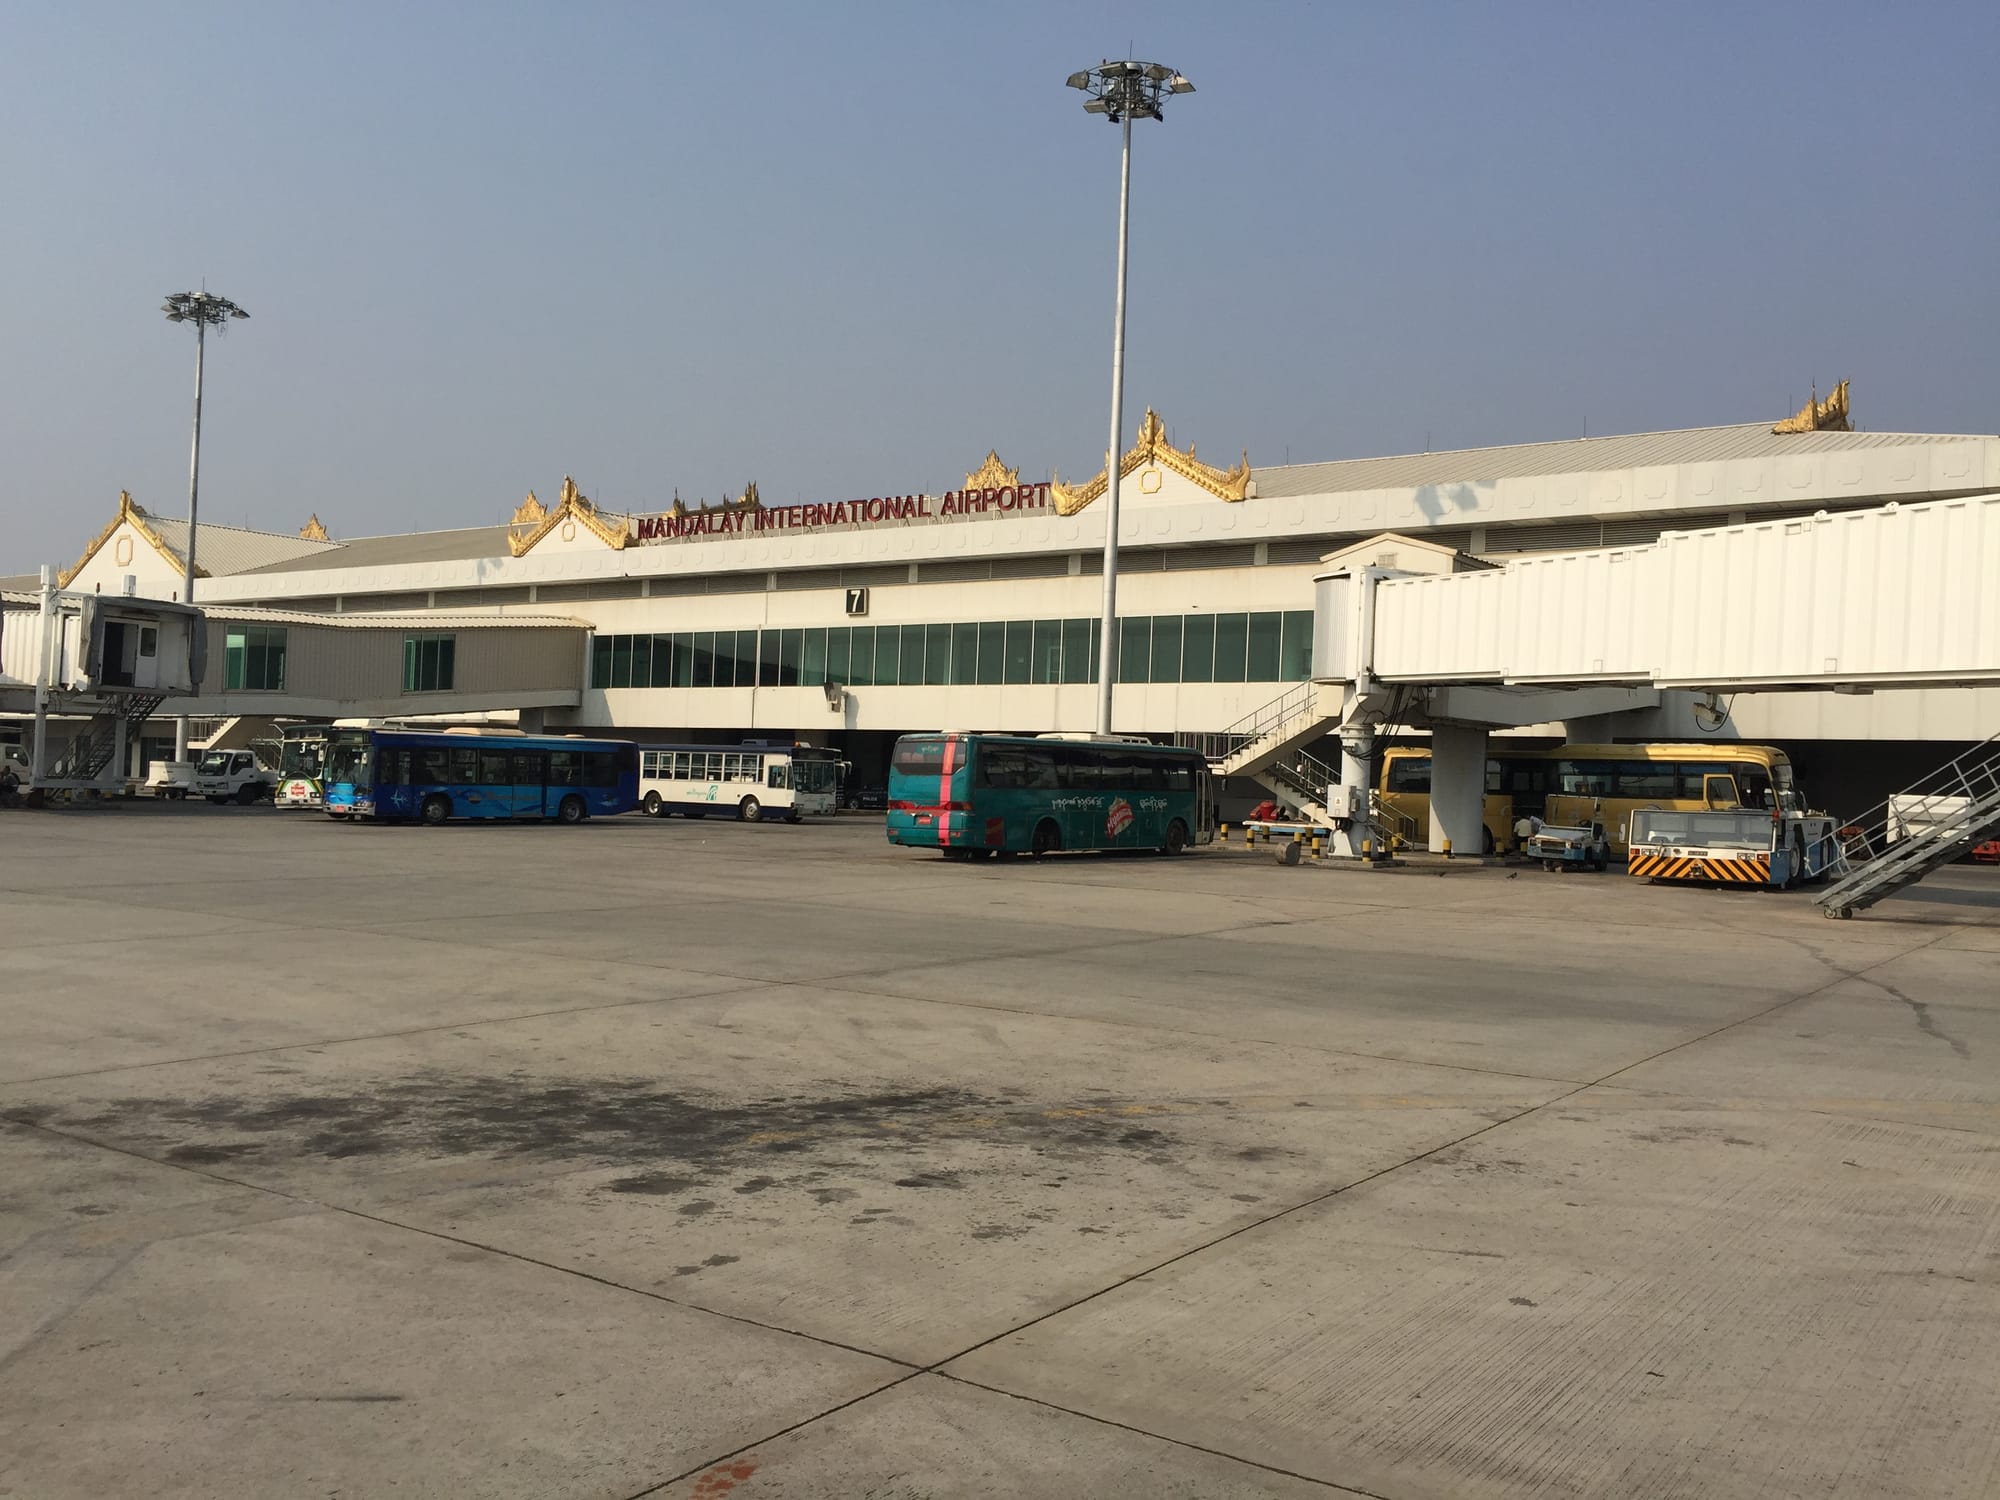 Photo by Author — Mandalay International Airport (MDL)